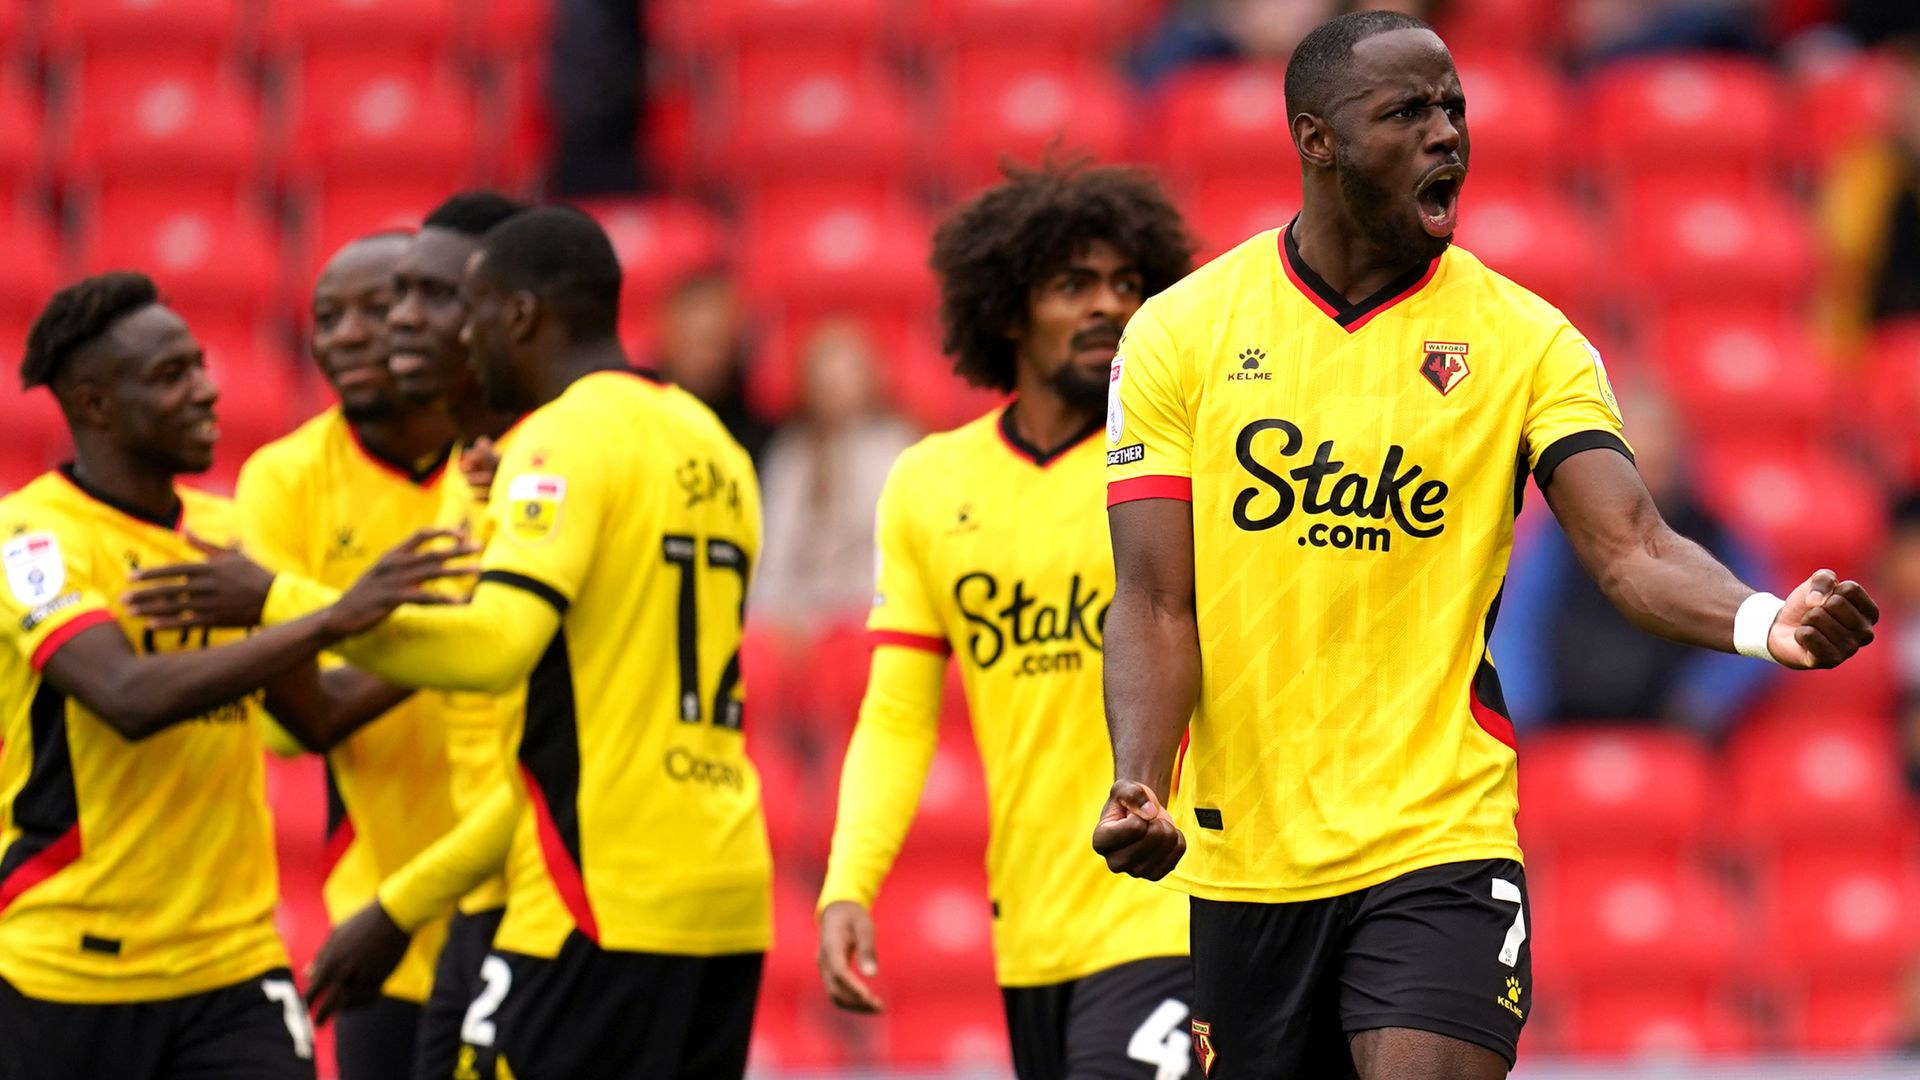 Watford thrash Stoke as Bilic reign begins with emphatic win